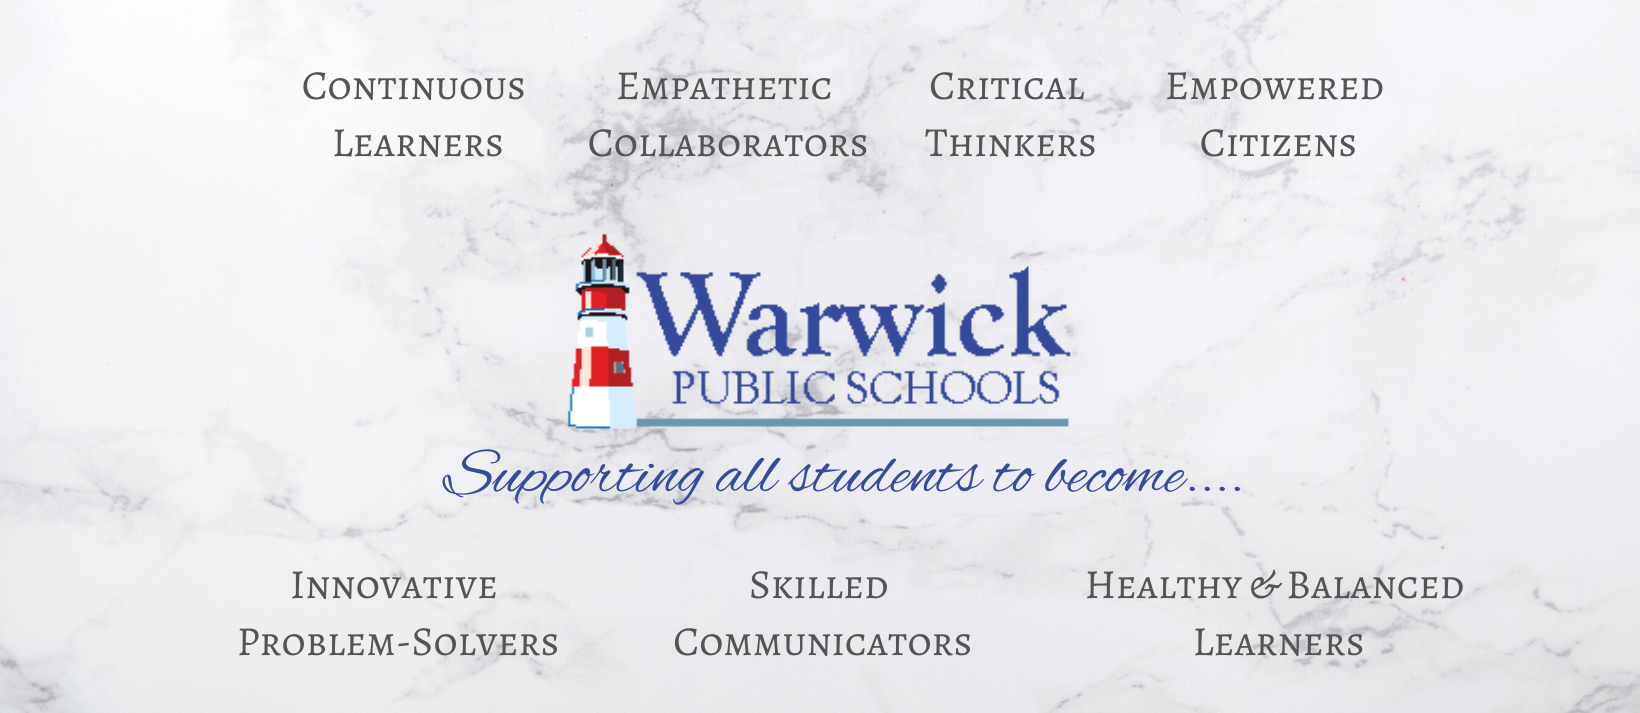 Warwick public schools, supporting all students to become Continuous learners, Empowered citizens, Empathetic collaborators, Skilled communicators, Innovative problem-solvers, Critical thinkers, Healthy and balanced learners